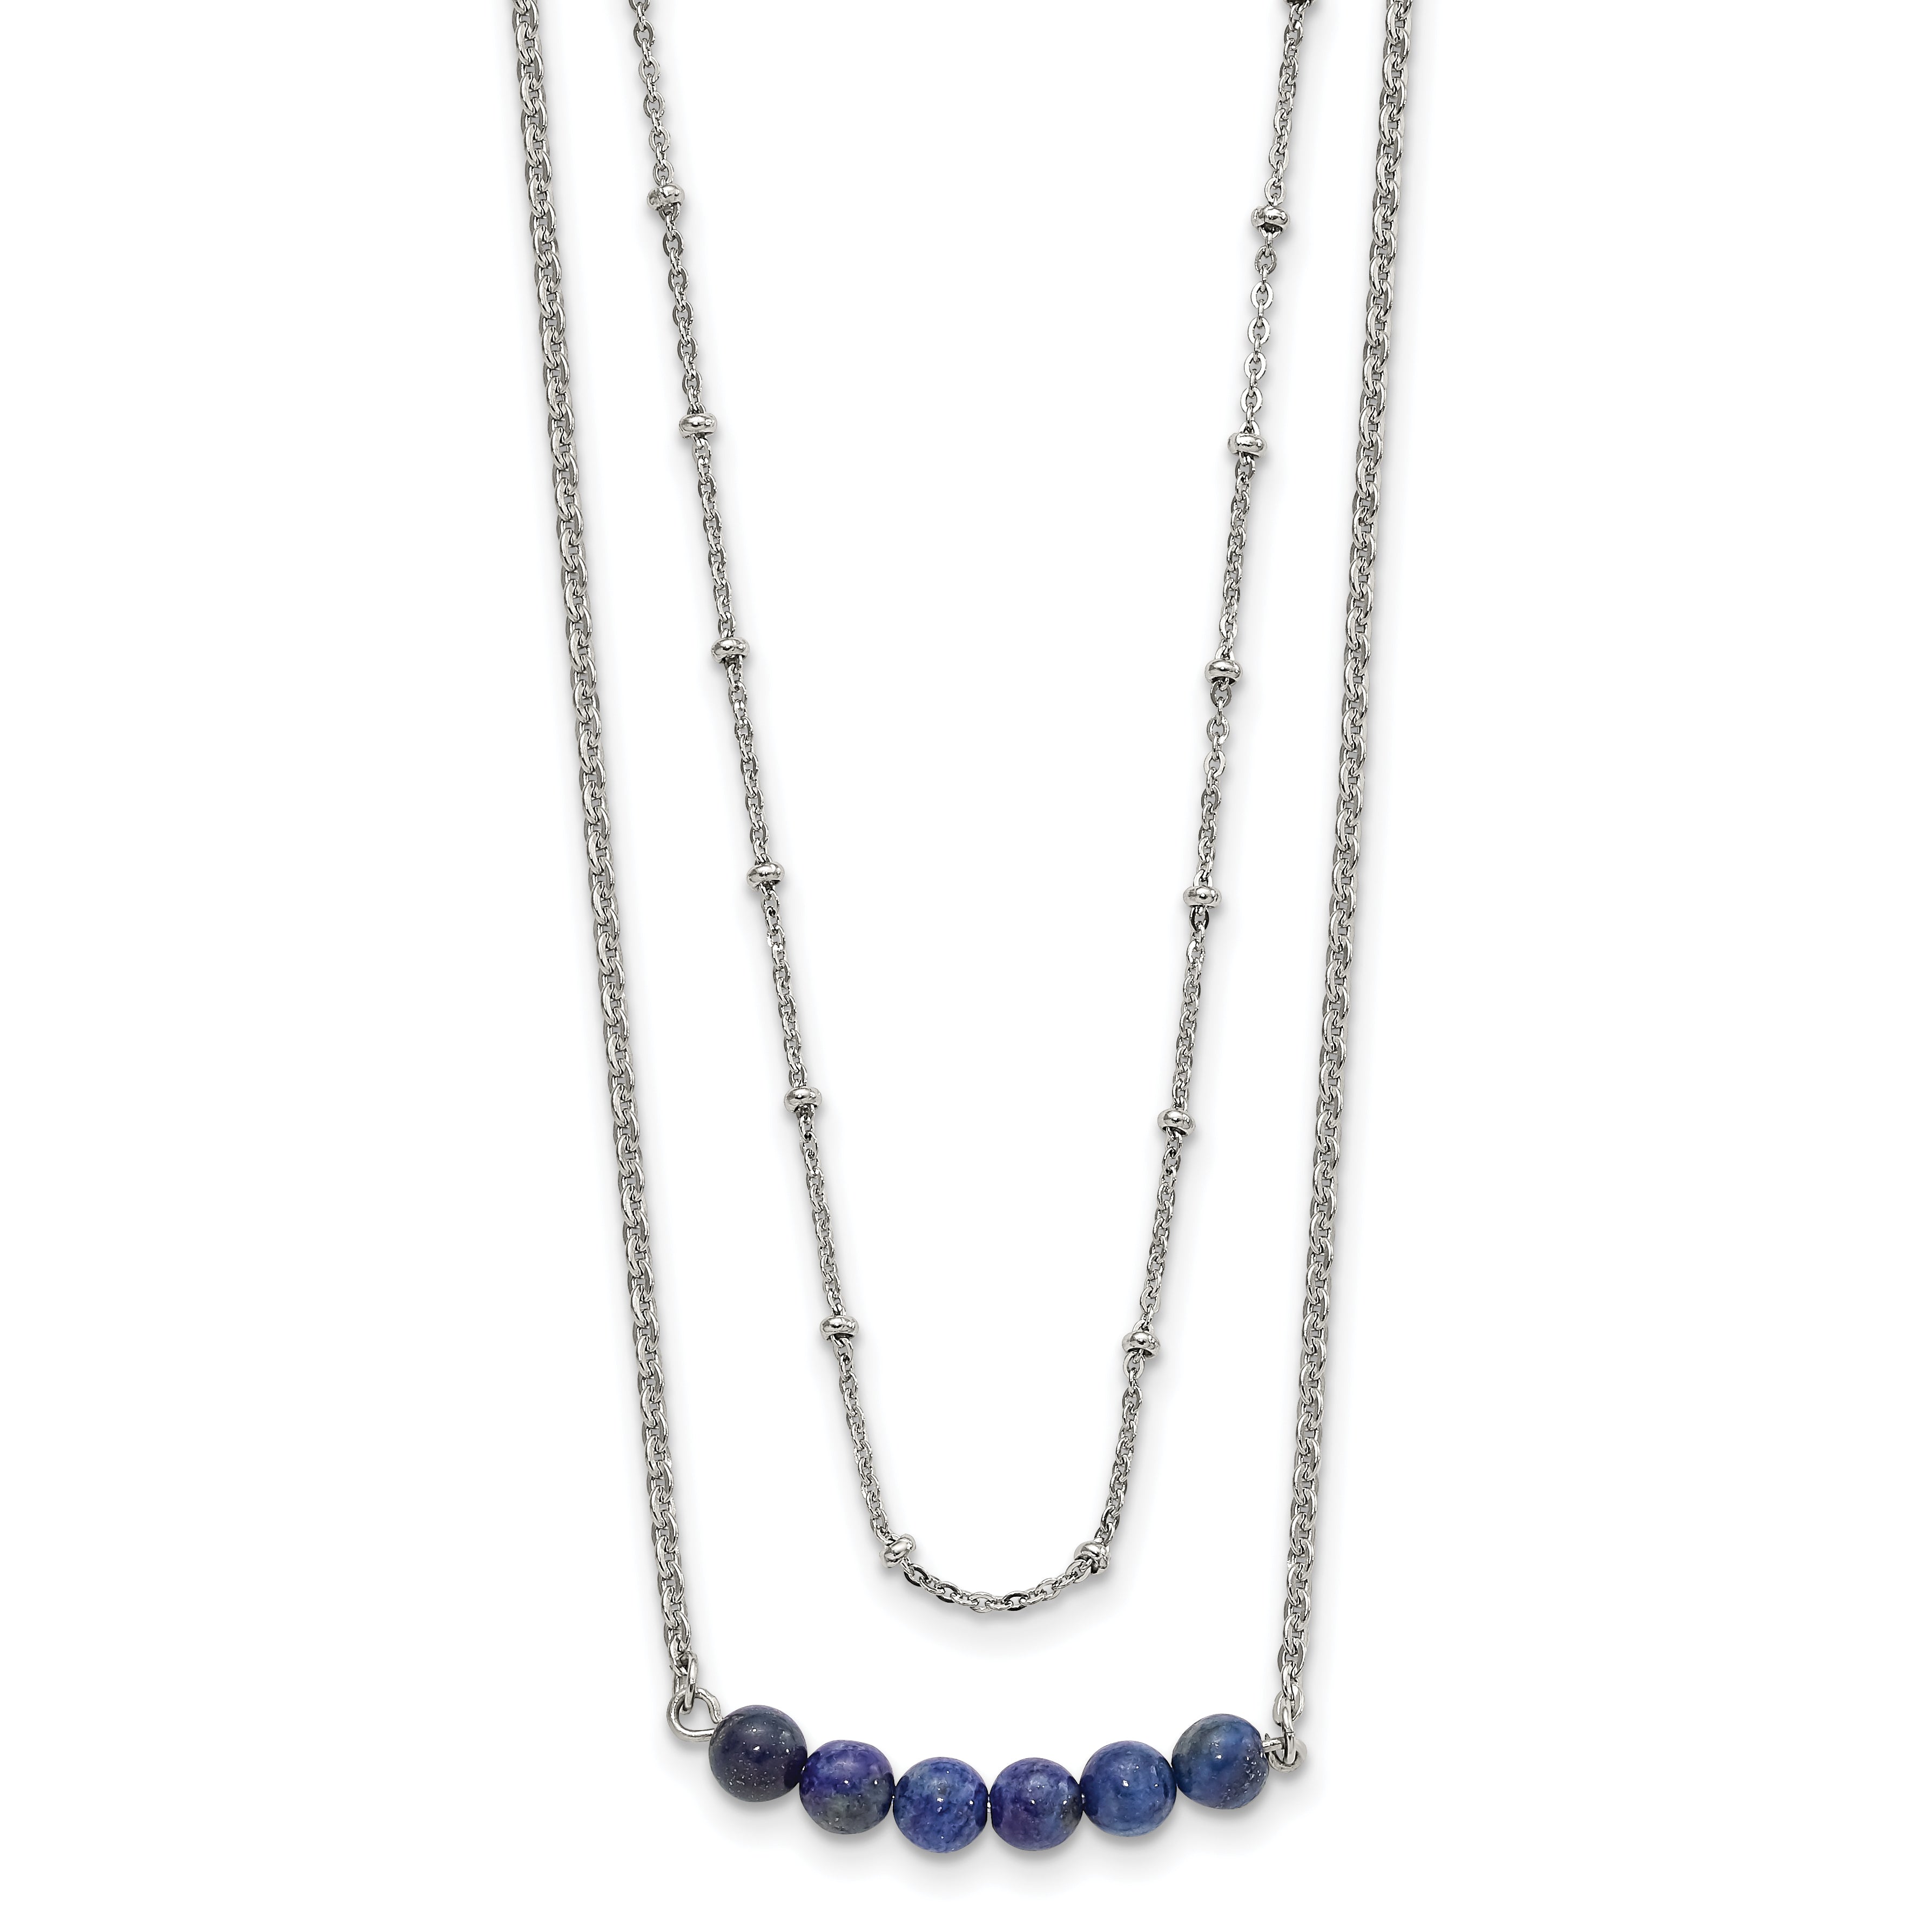 Chisel Stainless Steel Polished 2-Strand Lapis Beaded 16.5 inch with a 1 inch Extension Necklace